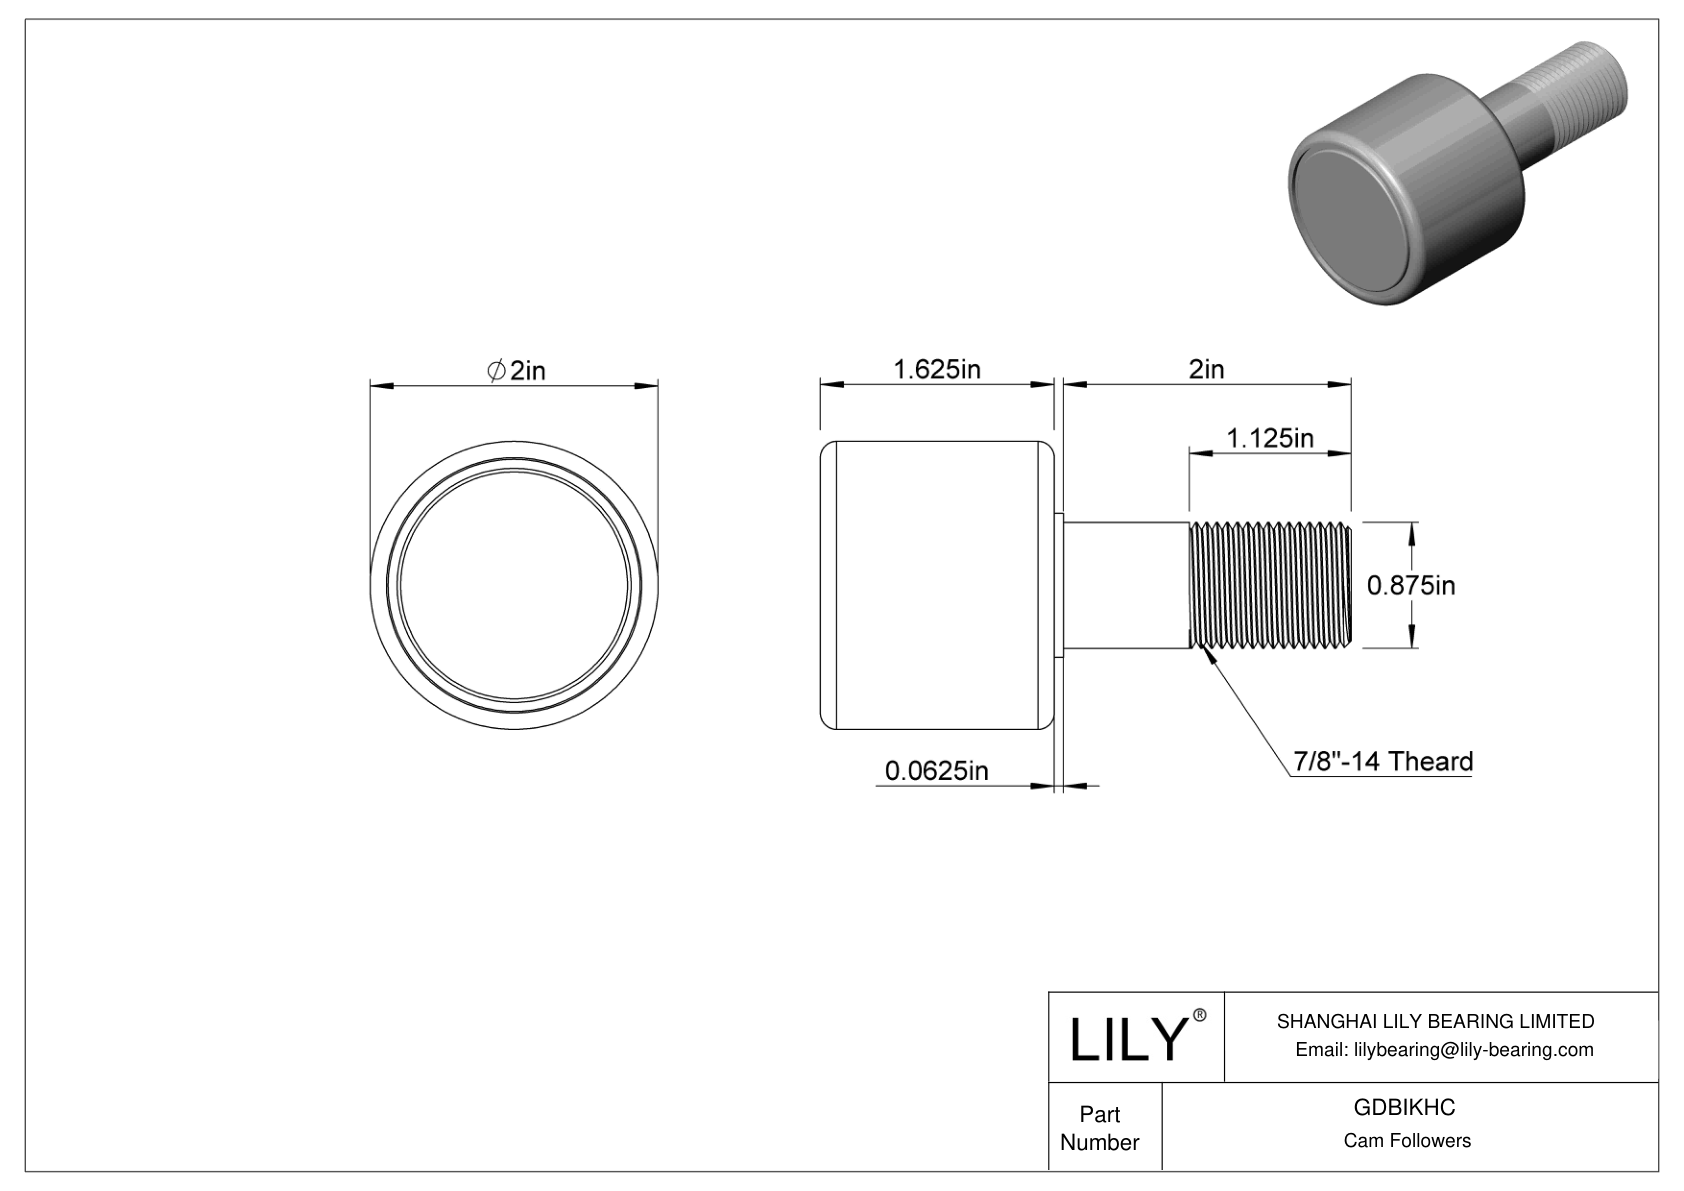 GDBIKHC Thrust-Load-Rated Threaded Track Rollers cad drawing